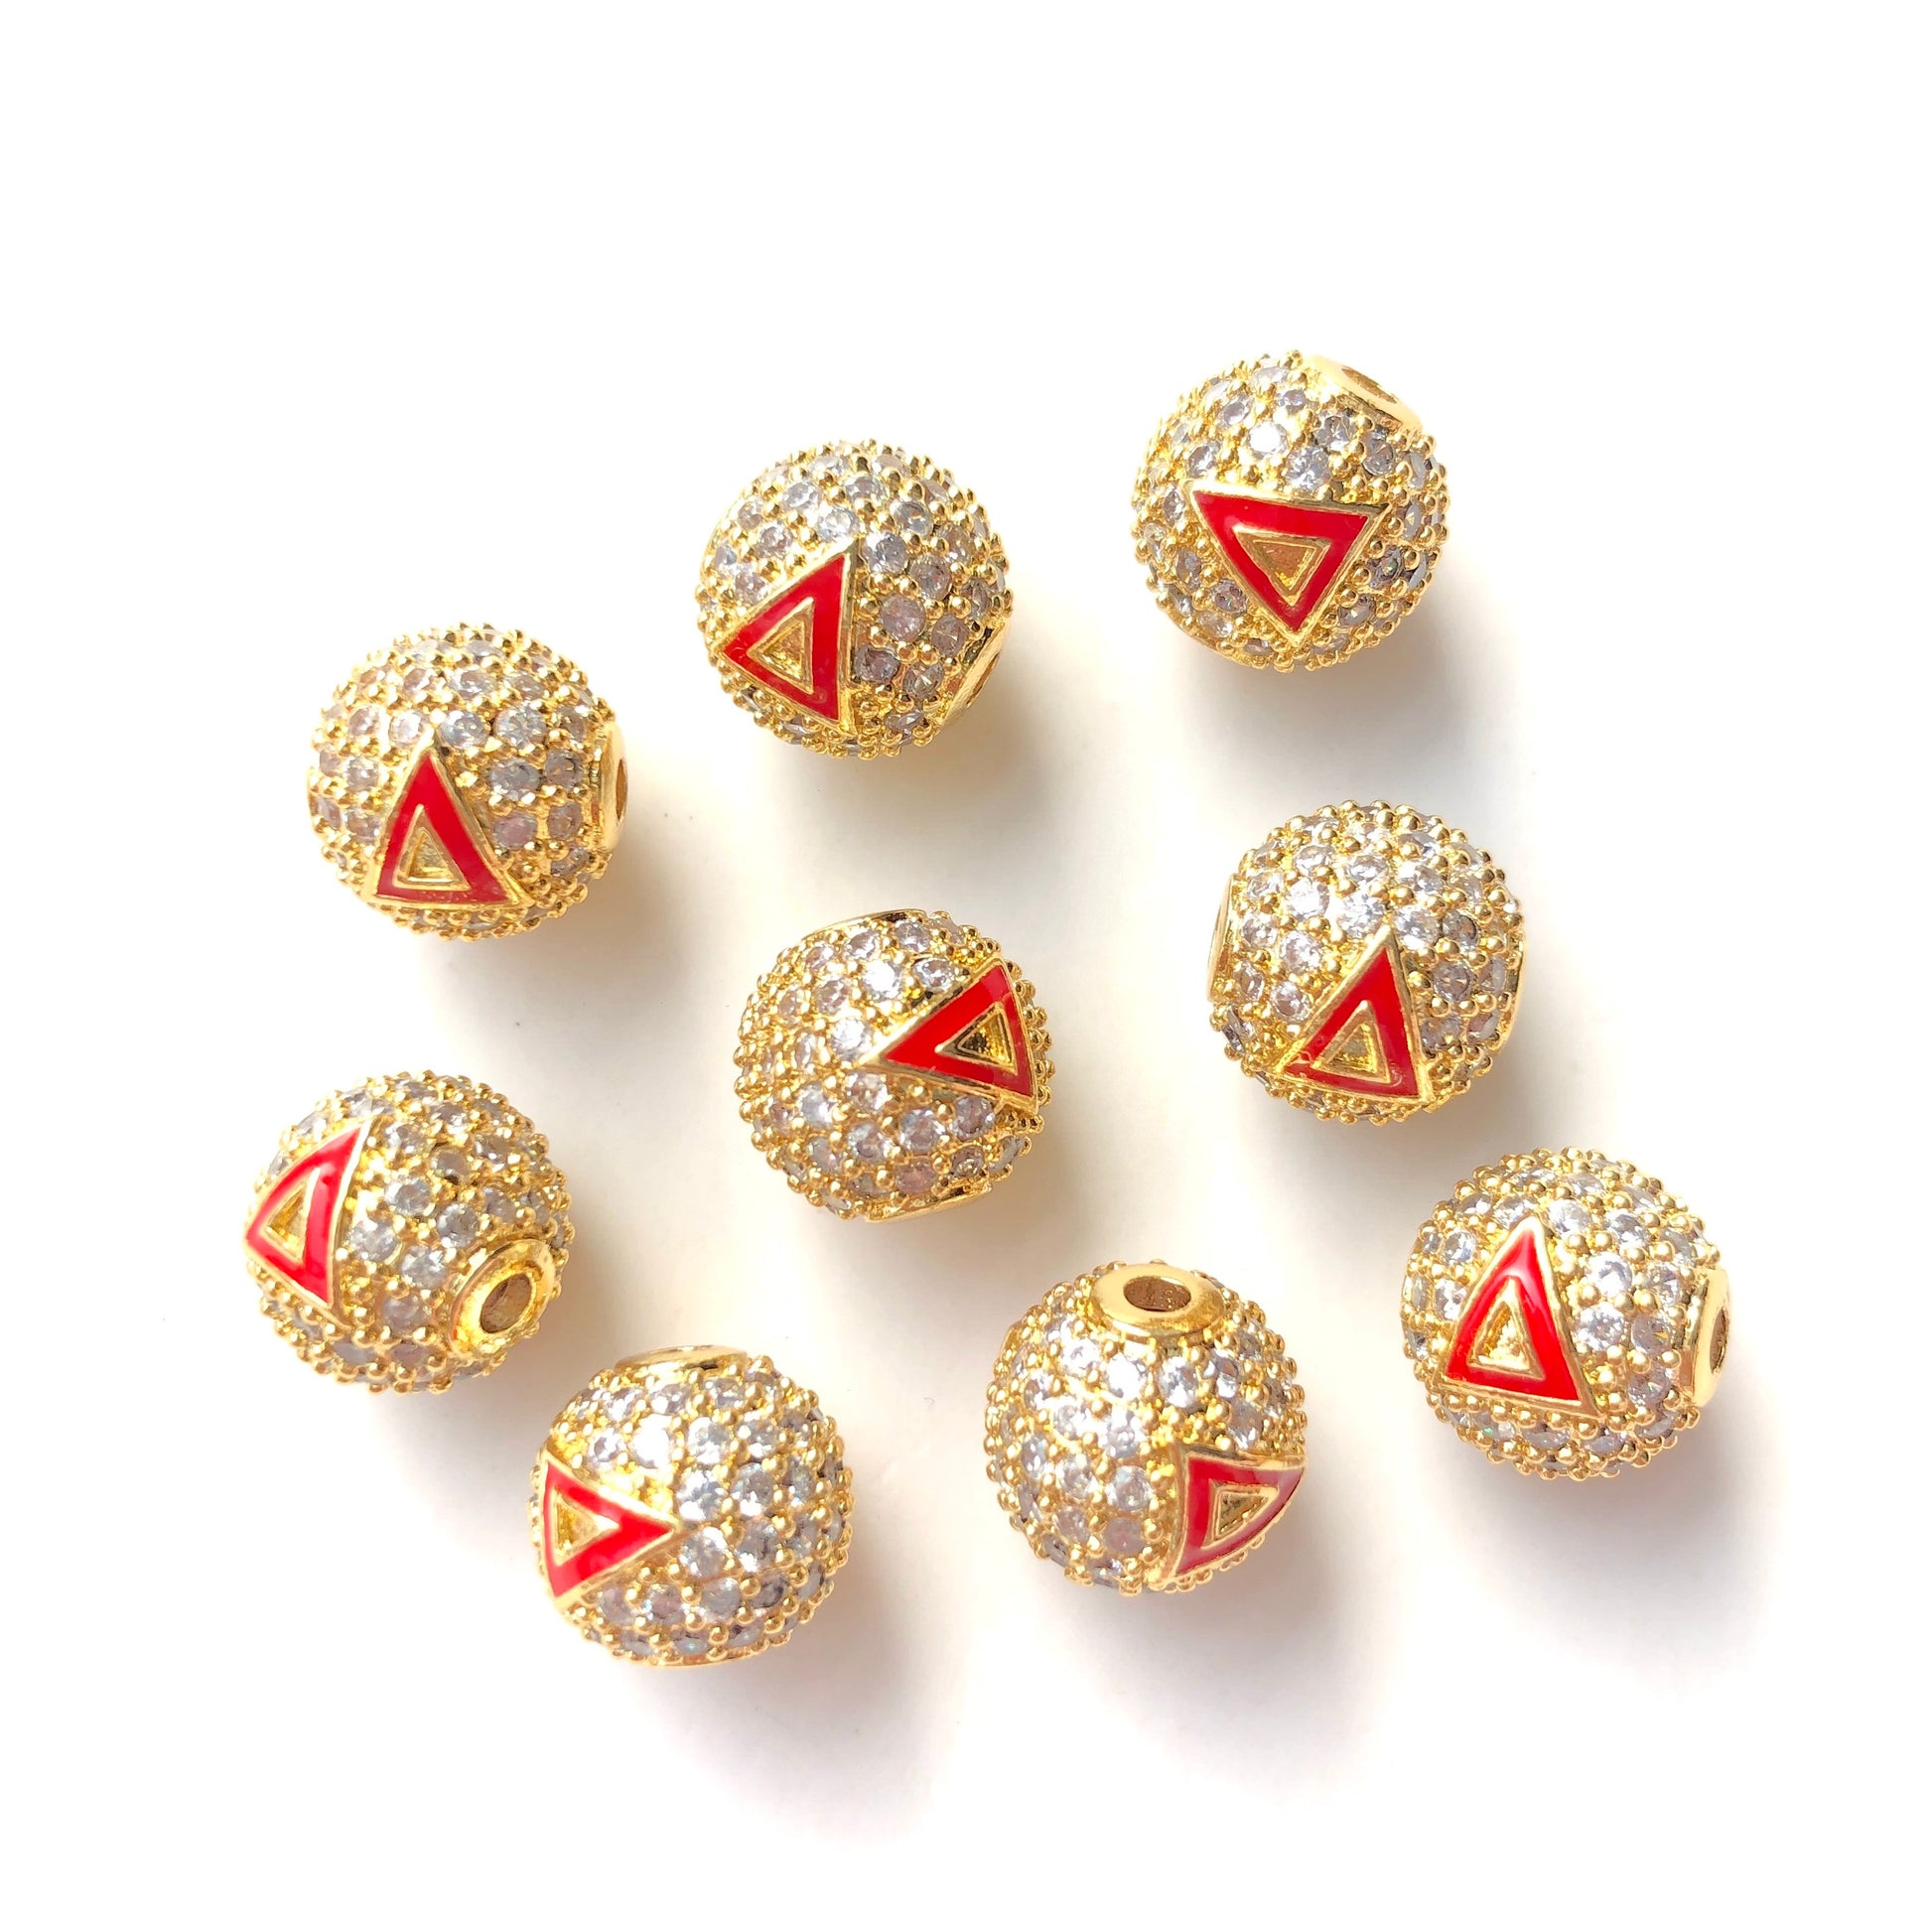 12pcs/lot 10mm Red Enamel CZ Paved Greek Letter "Δ", "Σ", "Θ" Ball Spacers Beads 12 Gold Δ CZ Paved Spacers 10mm Beads Ball Beads Greek Letters New Spacers Arrivals Charms Beads Beyond